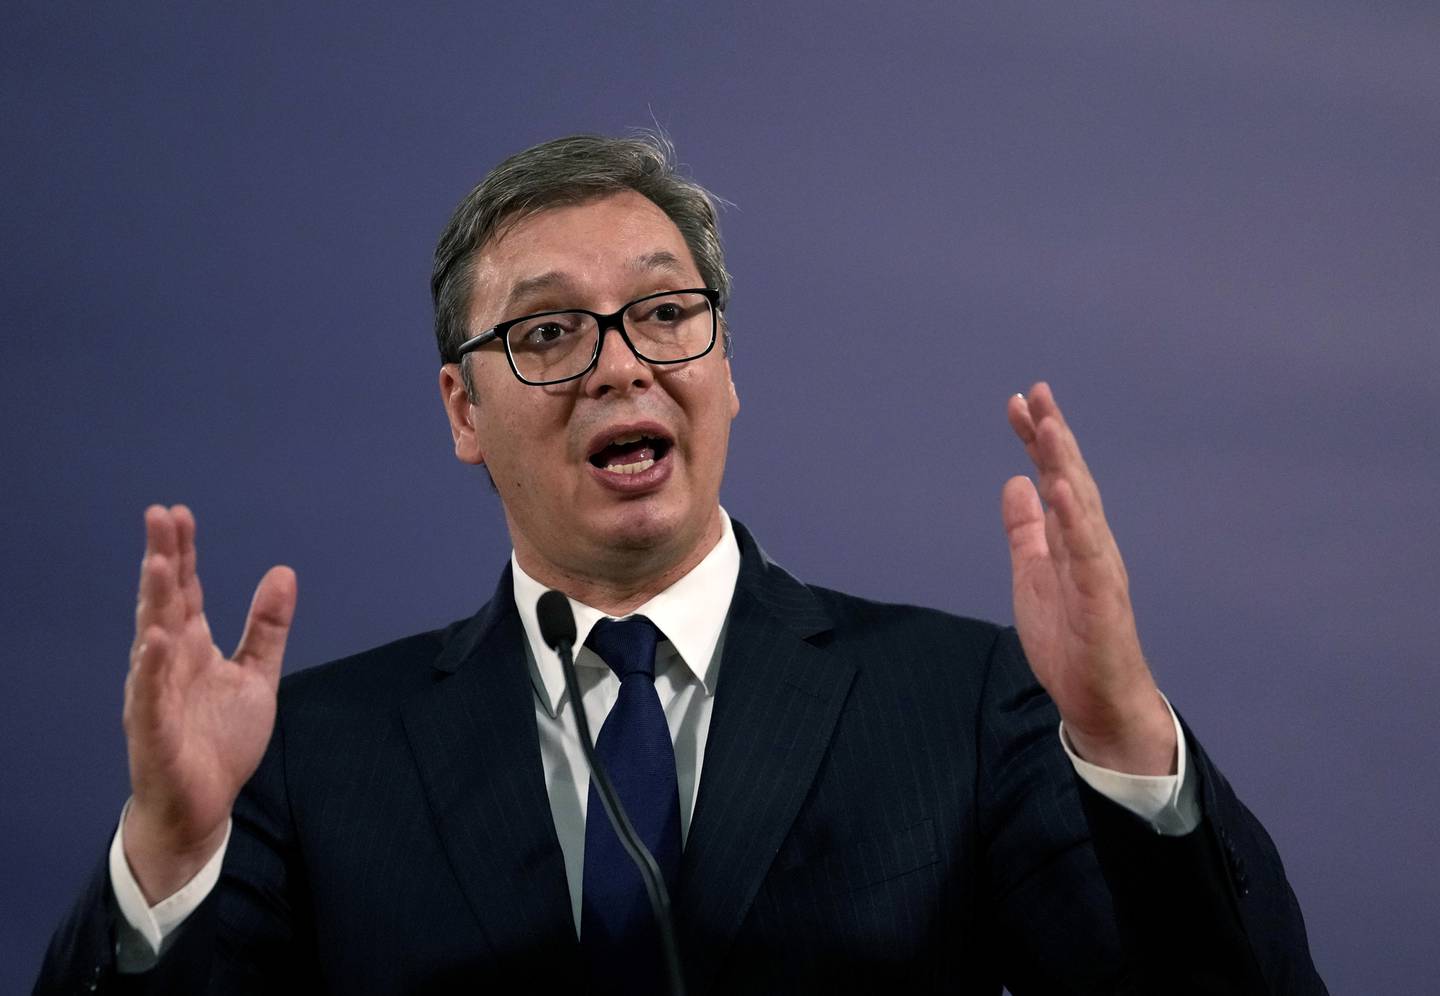 Serbia's President Aleksandar Vucic speaks during a press conference after a meeting with Russian Foreign Minister Sergey Lavrov in Belgrade, Serbia, Sunday, Oct. 10, 2021. Lavrov arrives in Serbia on the occasion of the summit of the Non-Aligned Movement. (AP Photo/Darko Vojinovic)